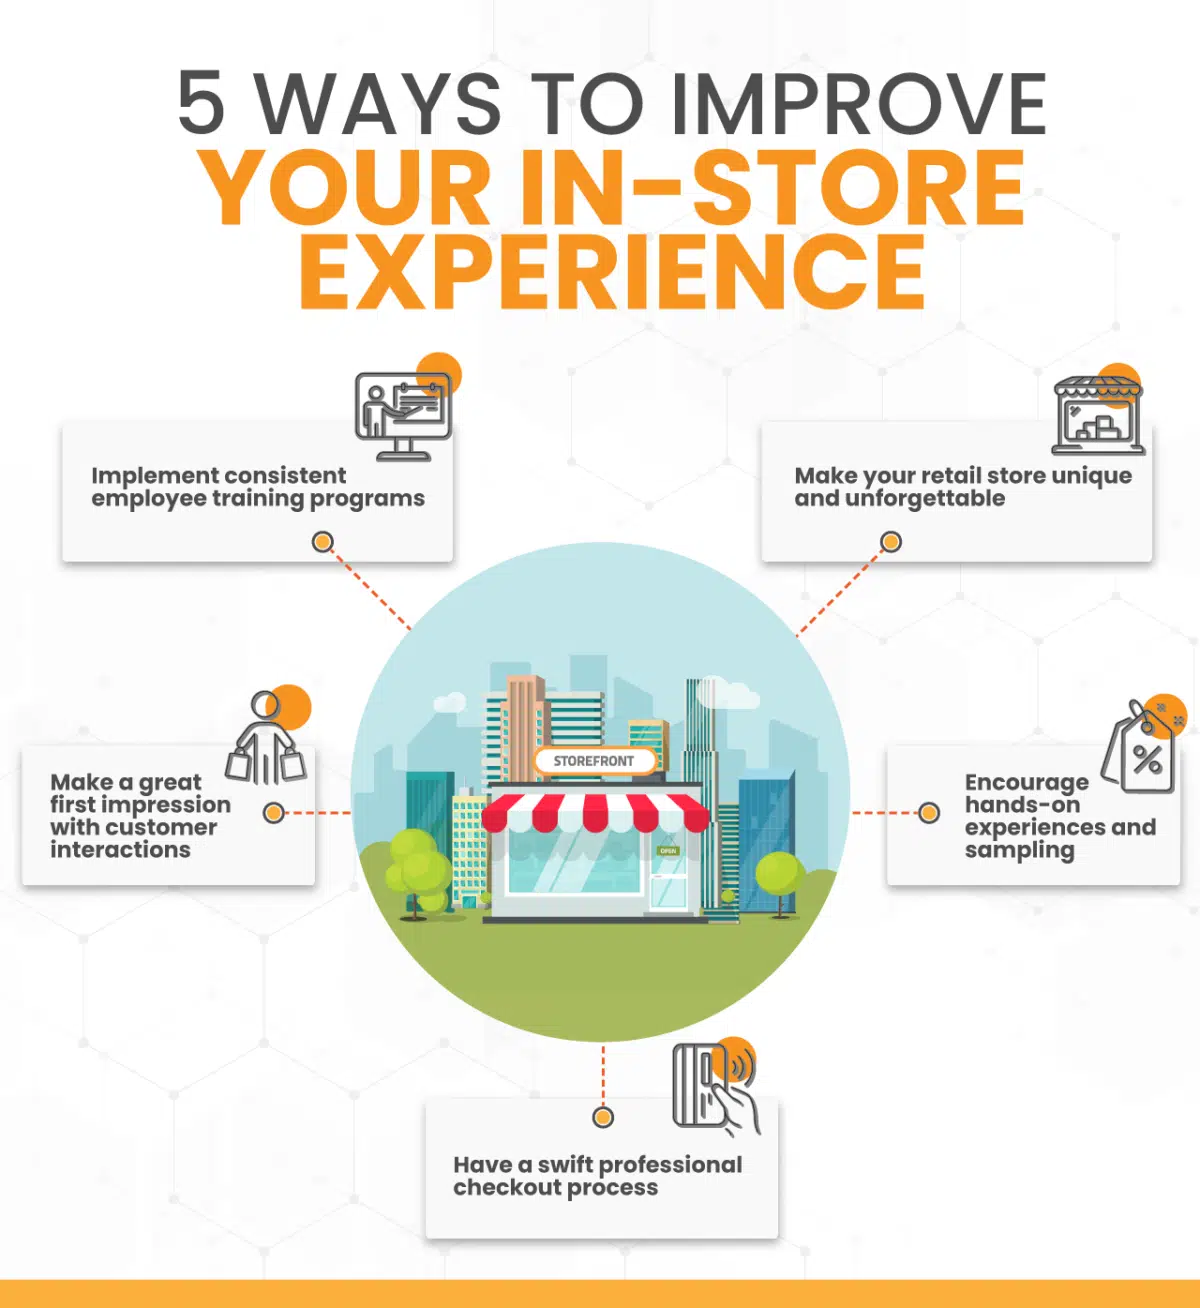 a graphic showing 5 ways to improve your in-store experience